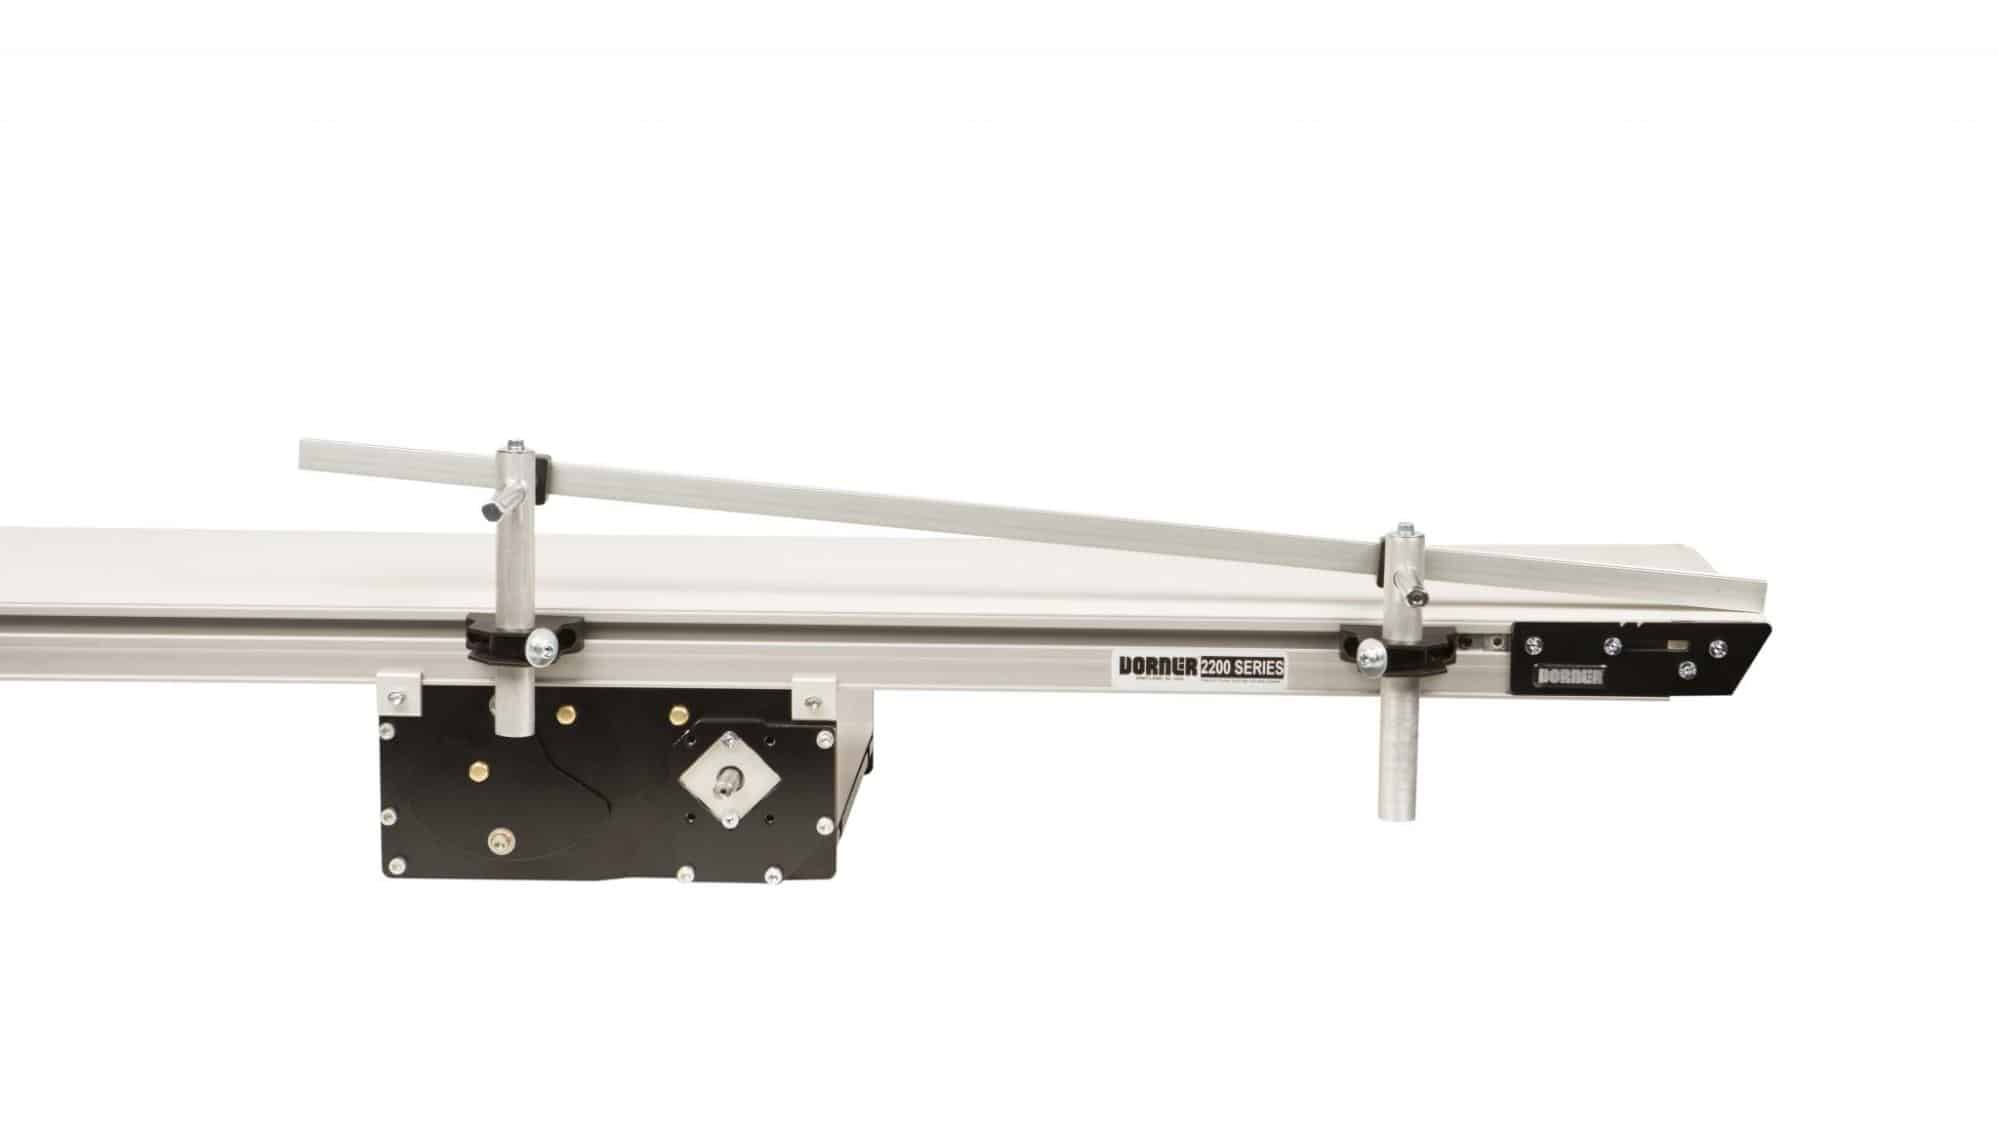 A Dorner 2200 belted conveyor, with different guiding options.